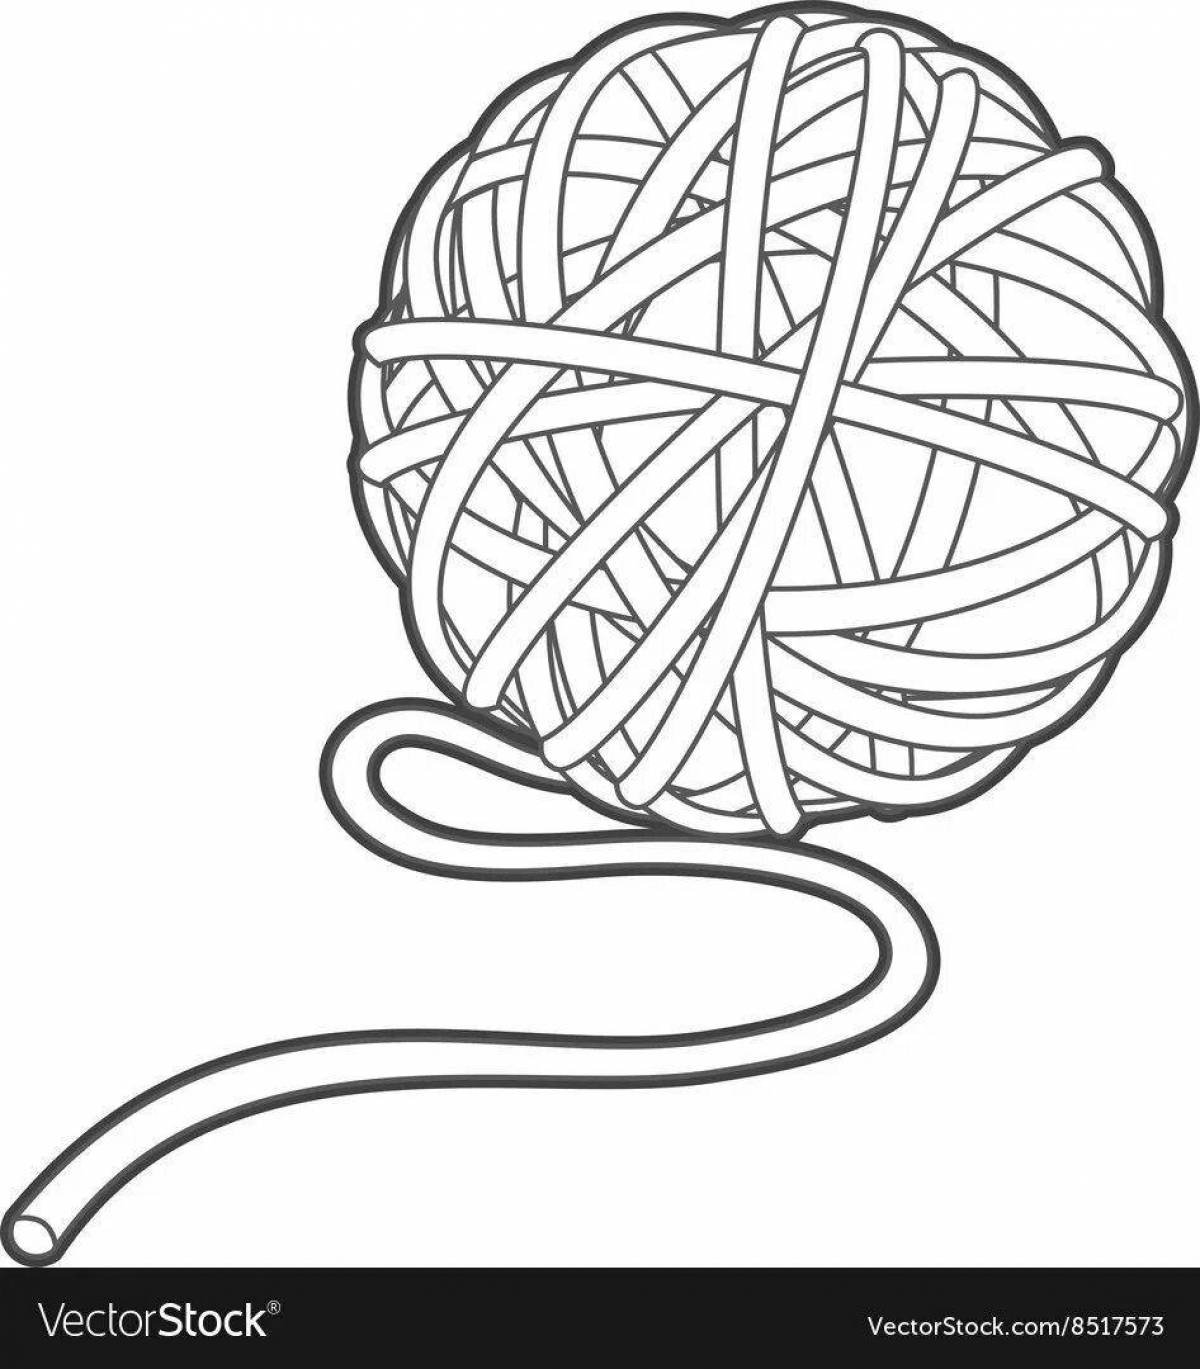 Coloring page dazzling ball of thread